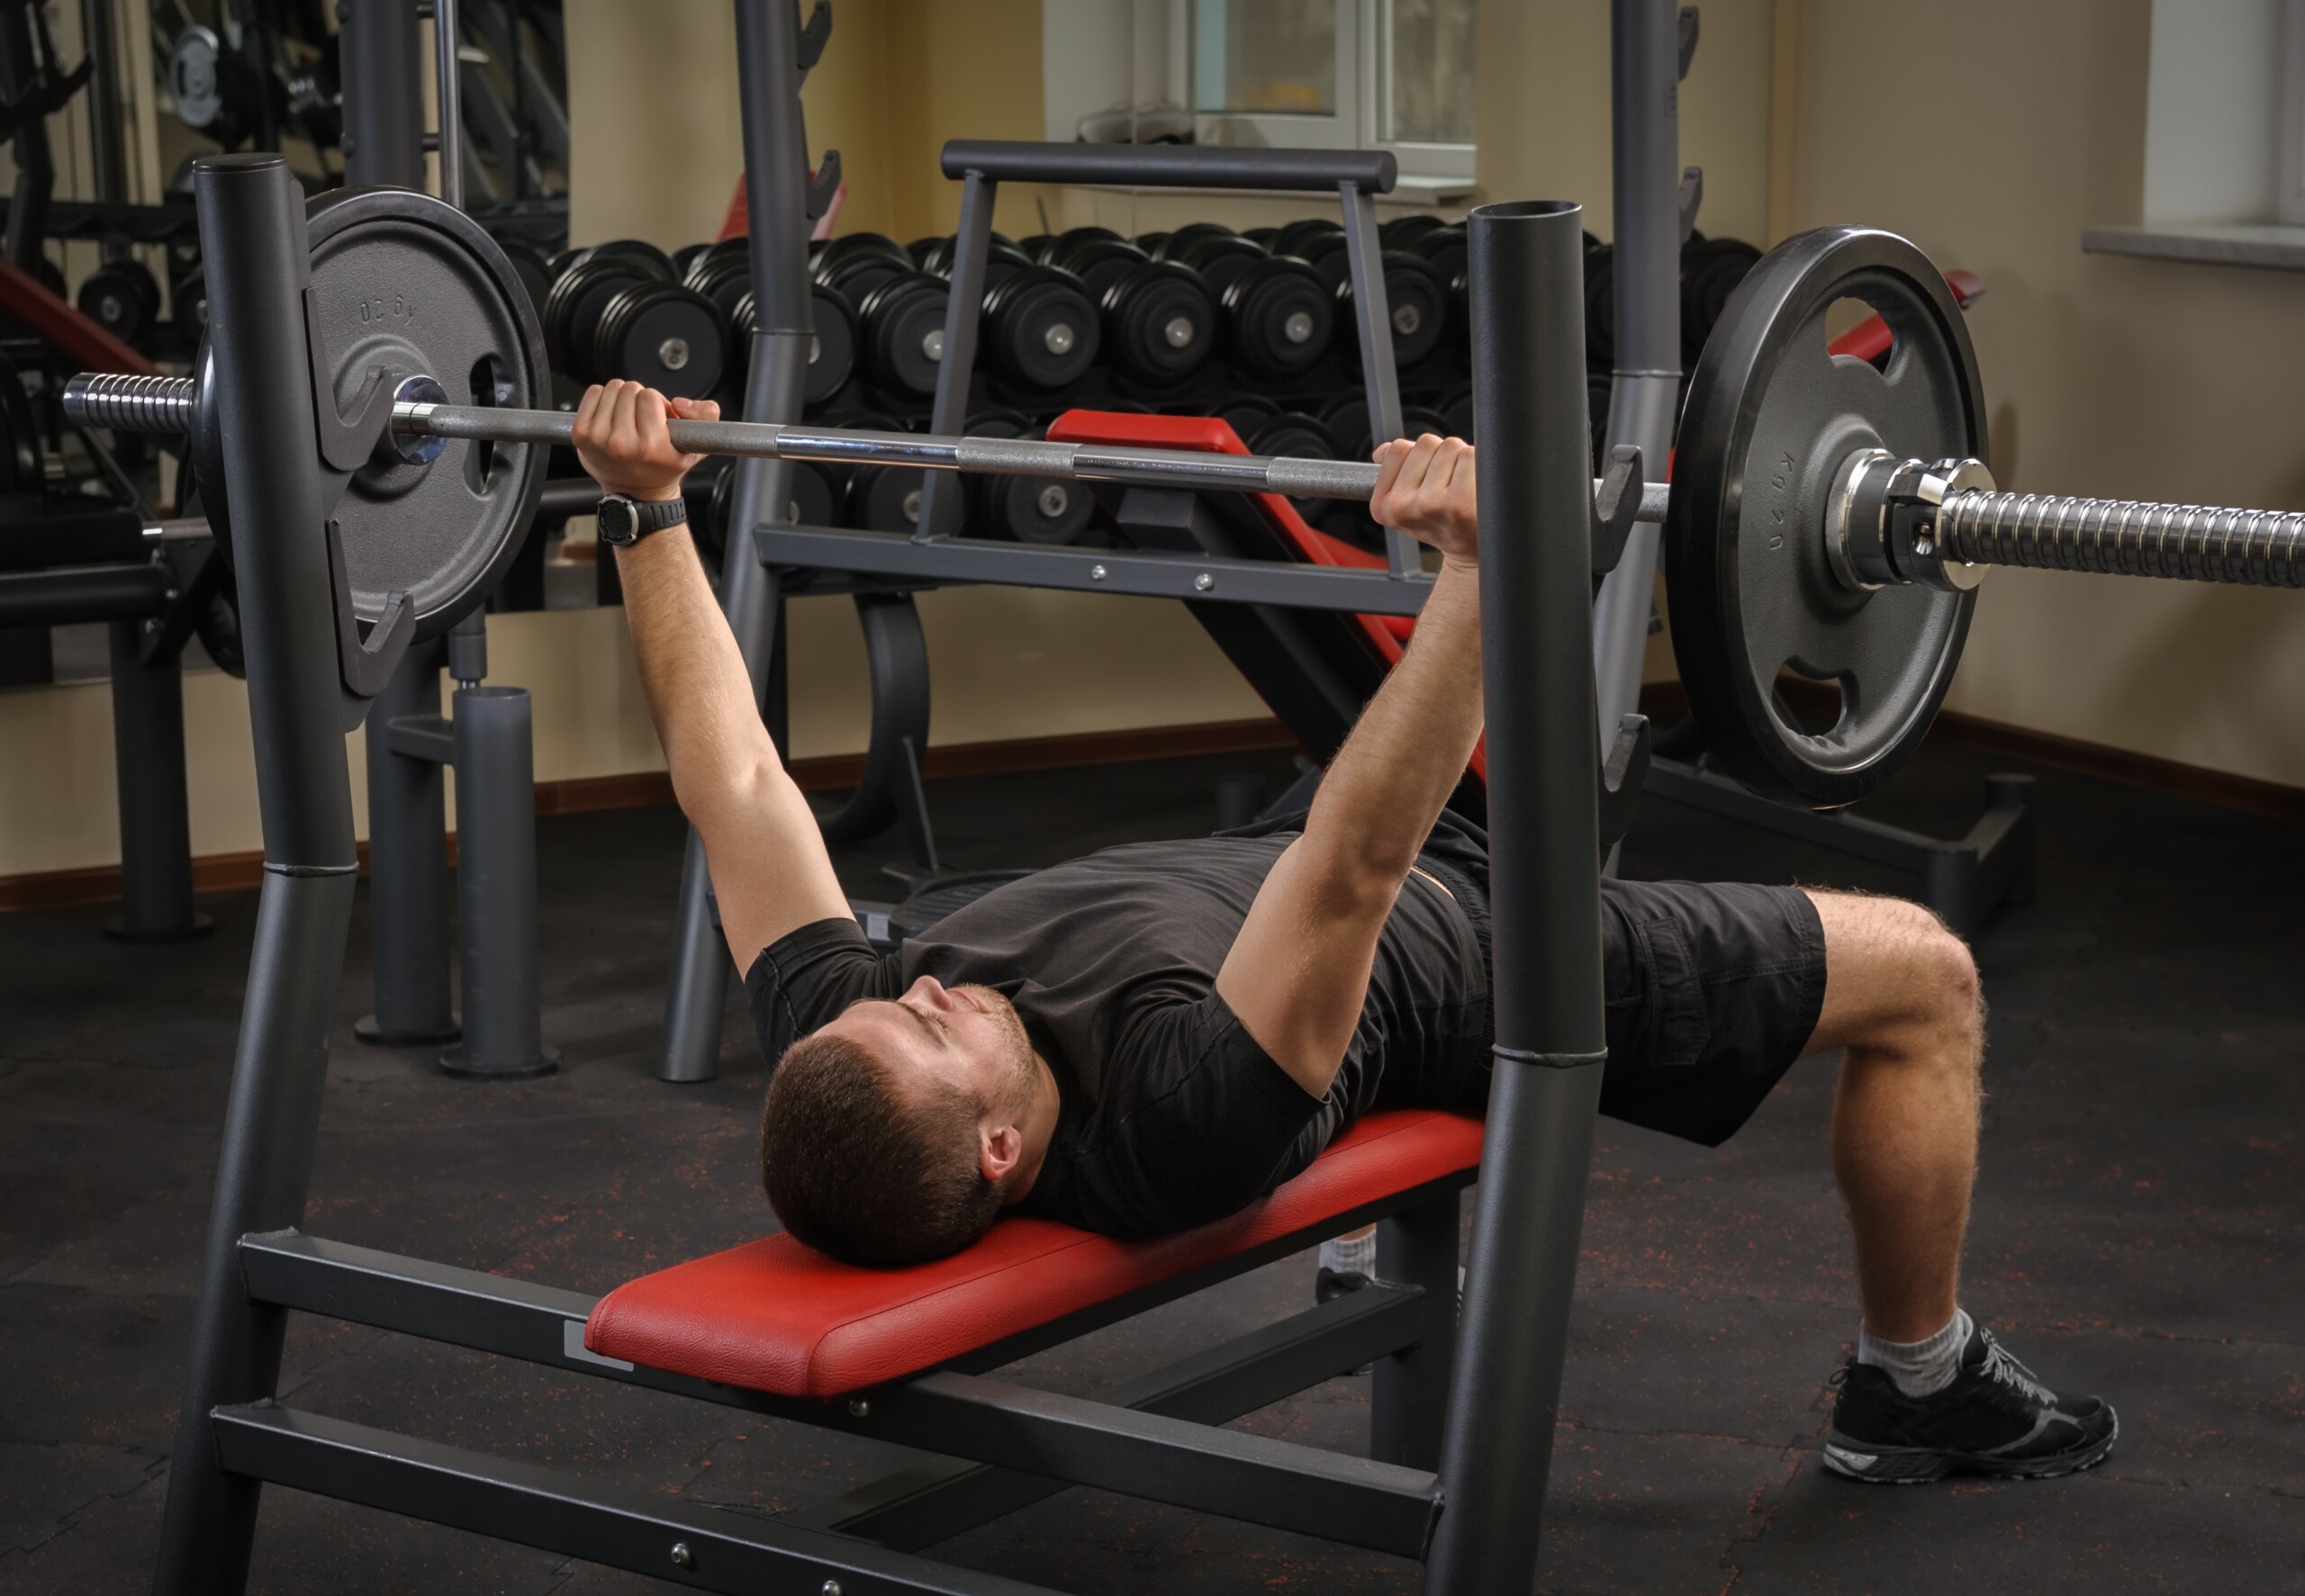 Locking Elbows Out During Bench Press: Pros & Cons